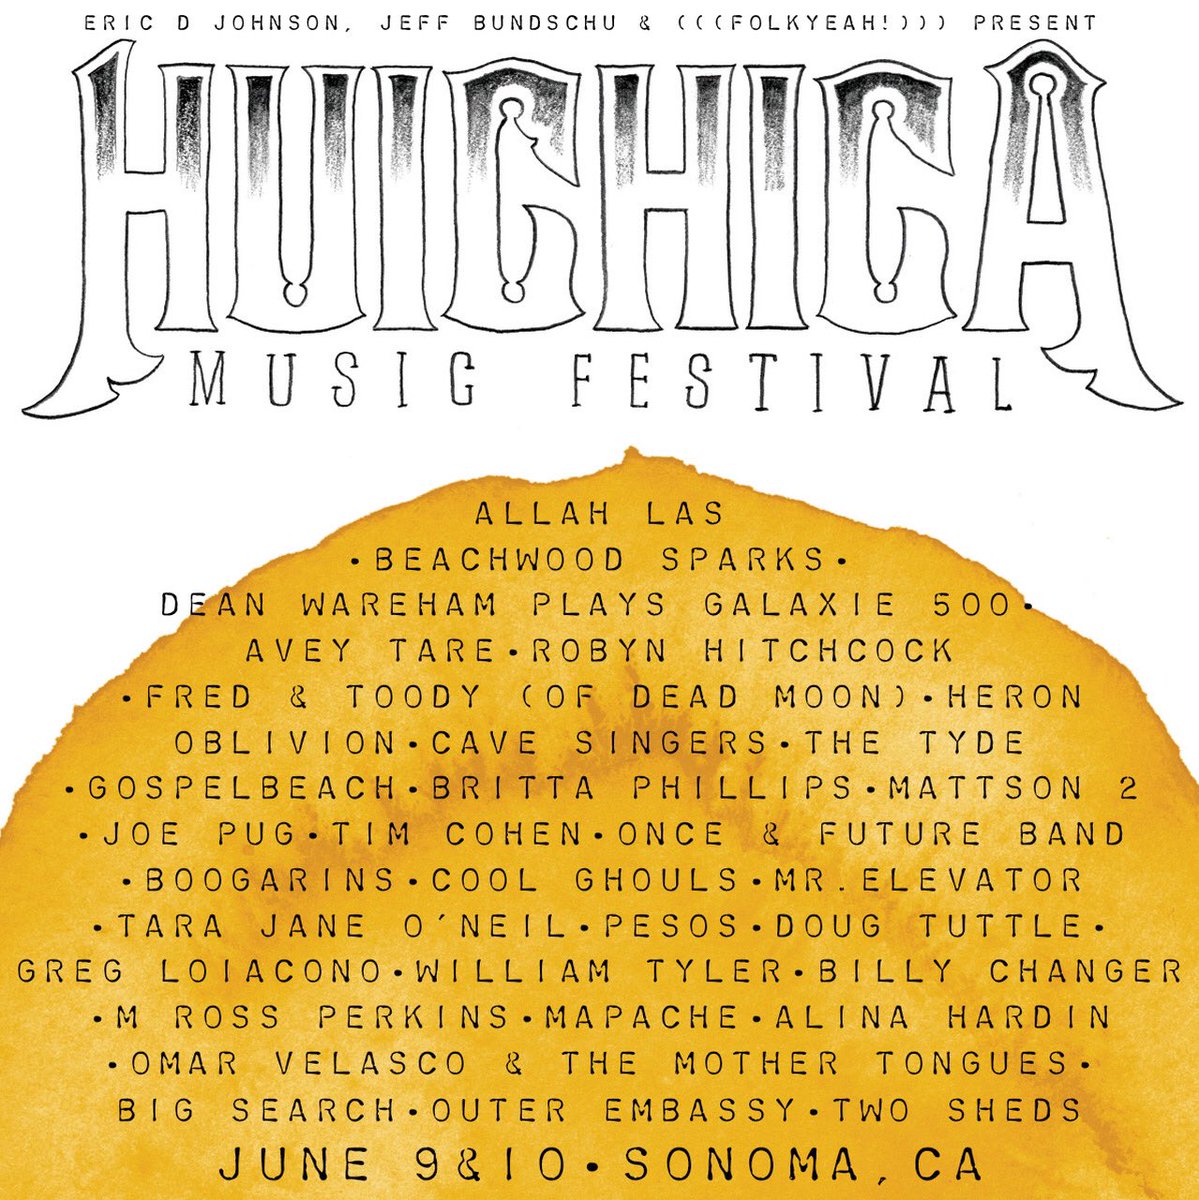 Going to be playing @Huichica in Sonoma this June!